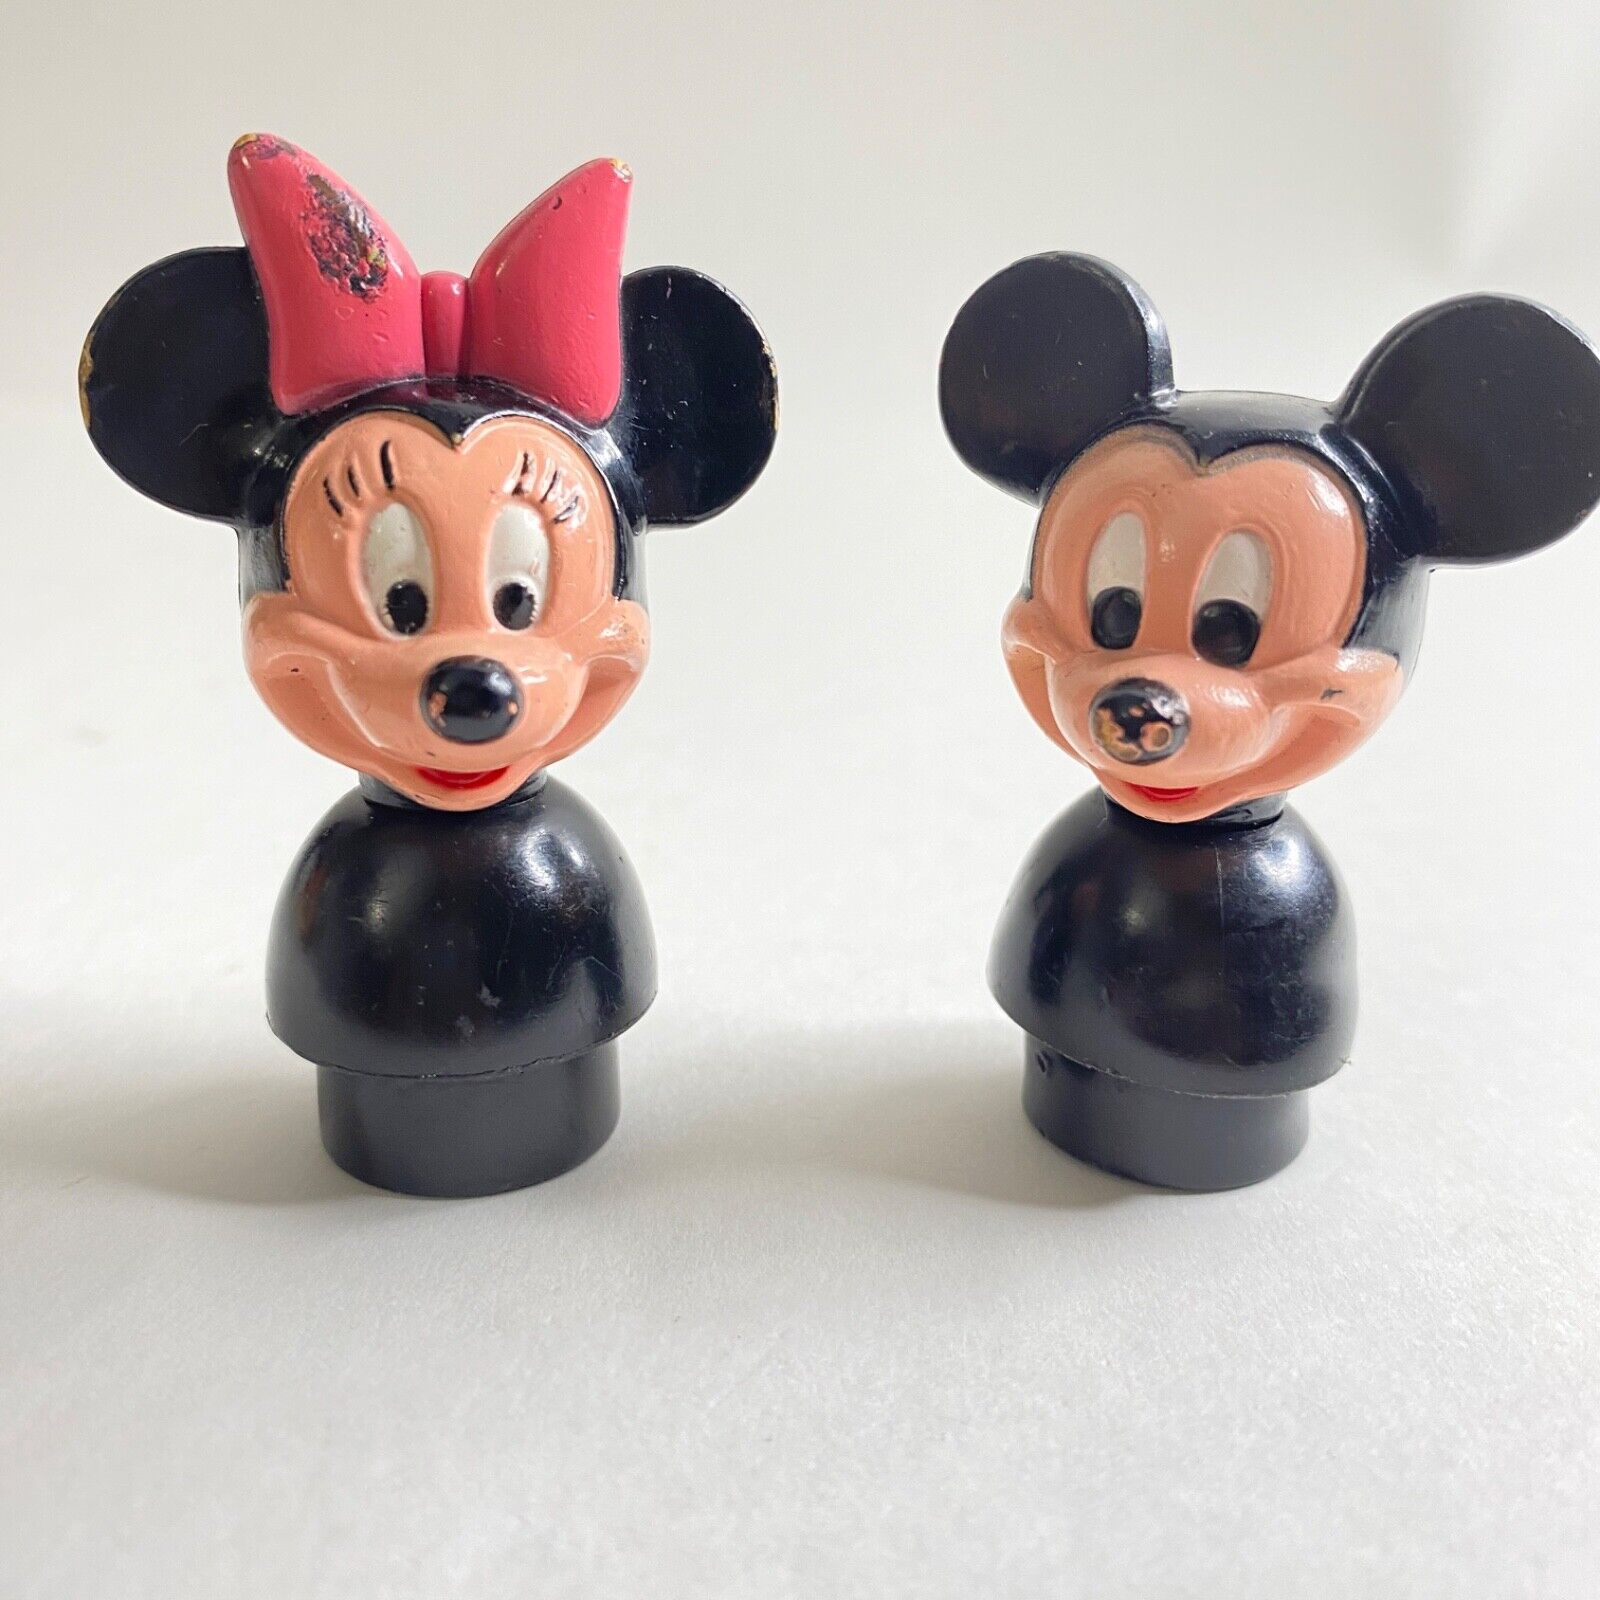 Vintage Disney ILLCO Little People Mickey Minnie Mouse fit Fisher Price lot